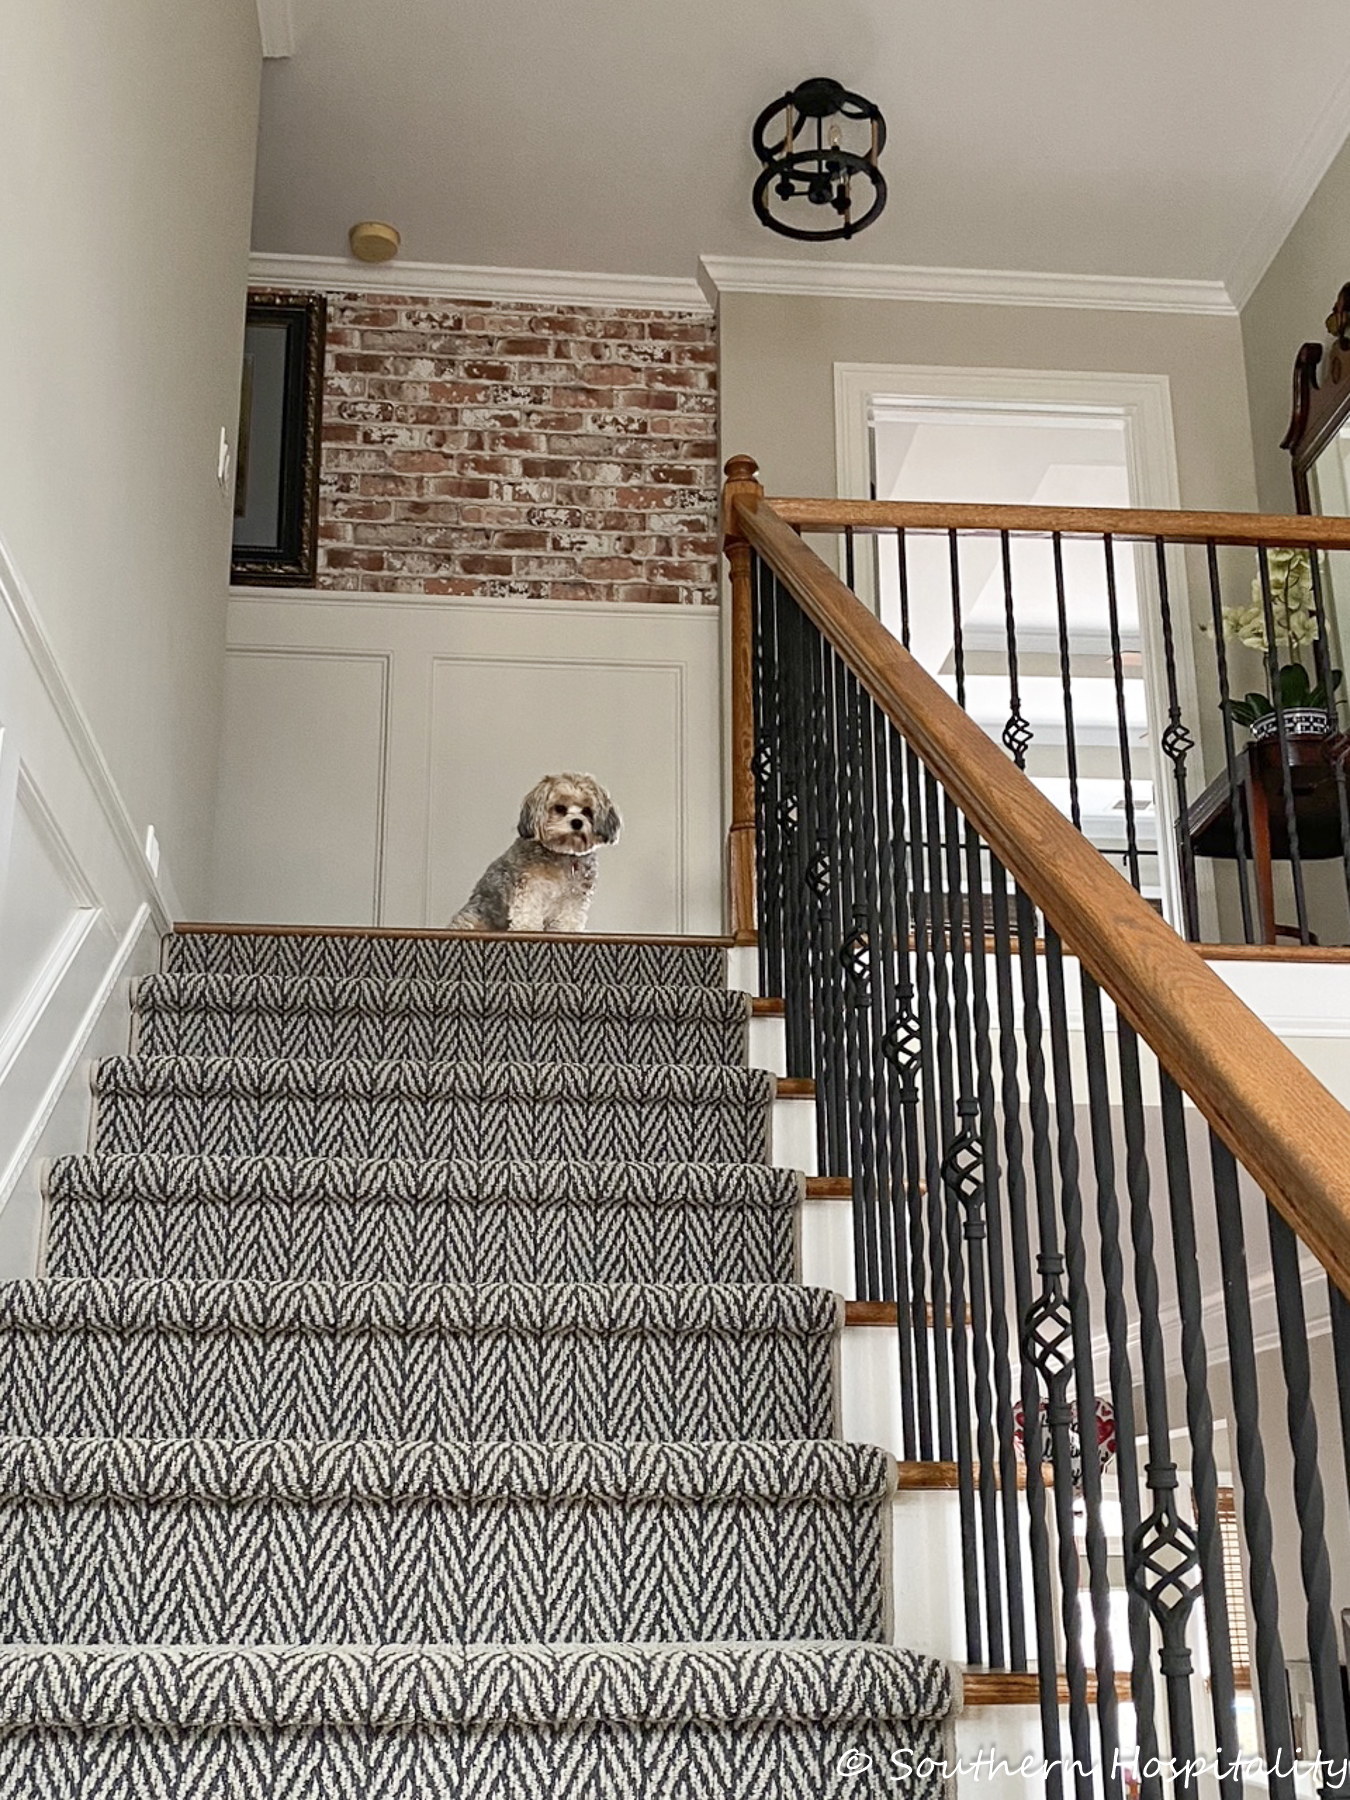 Wallpapering a Stairwell  Tips You Need to Know  The Homes I Have Made